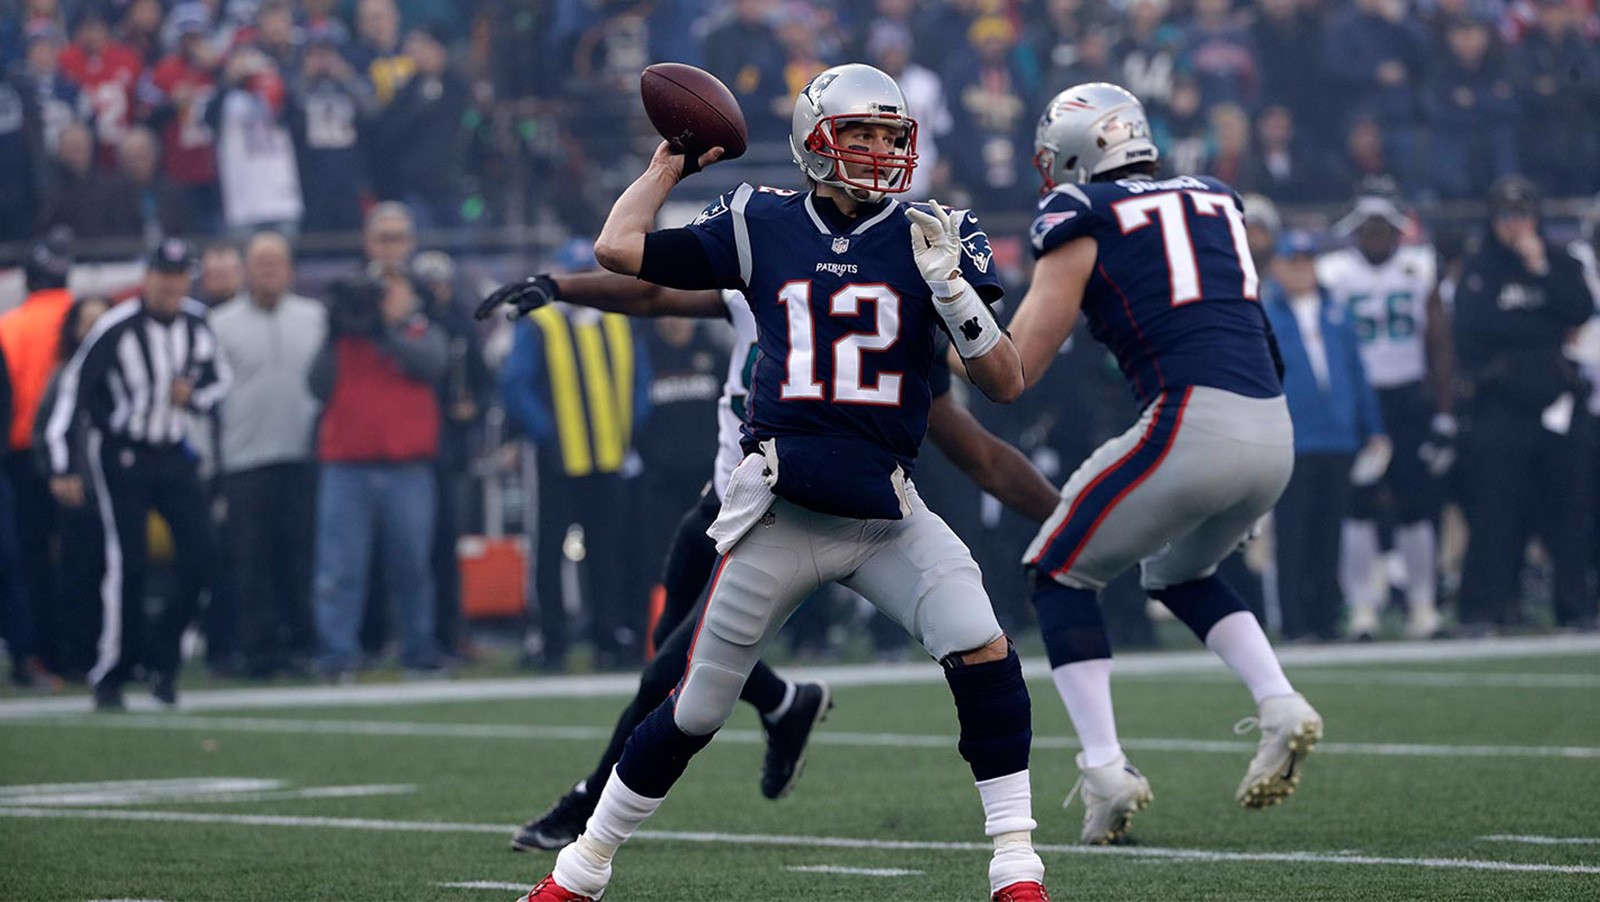 Patriots Settle as Solid Super Bowl Betting Favorites Against Eagles